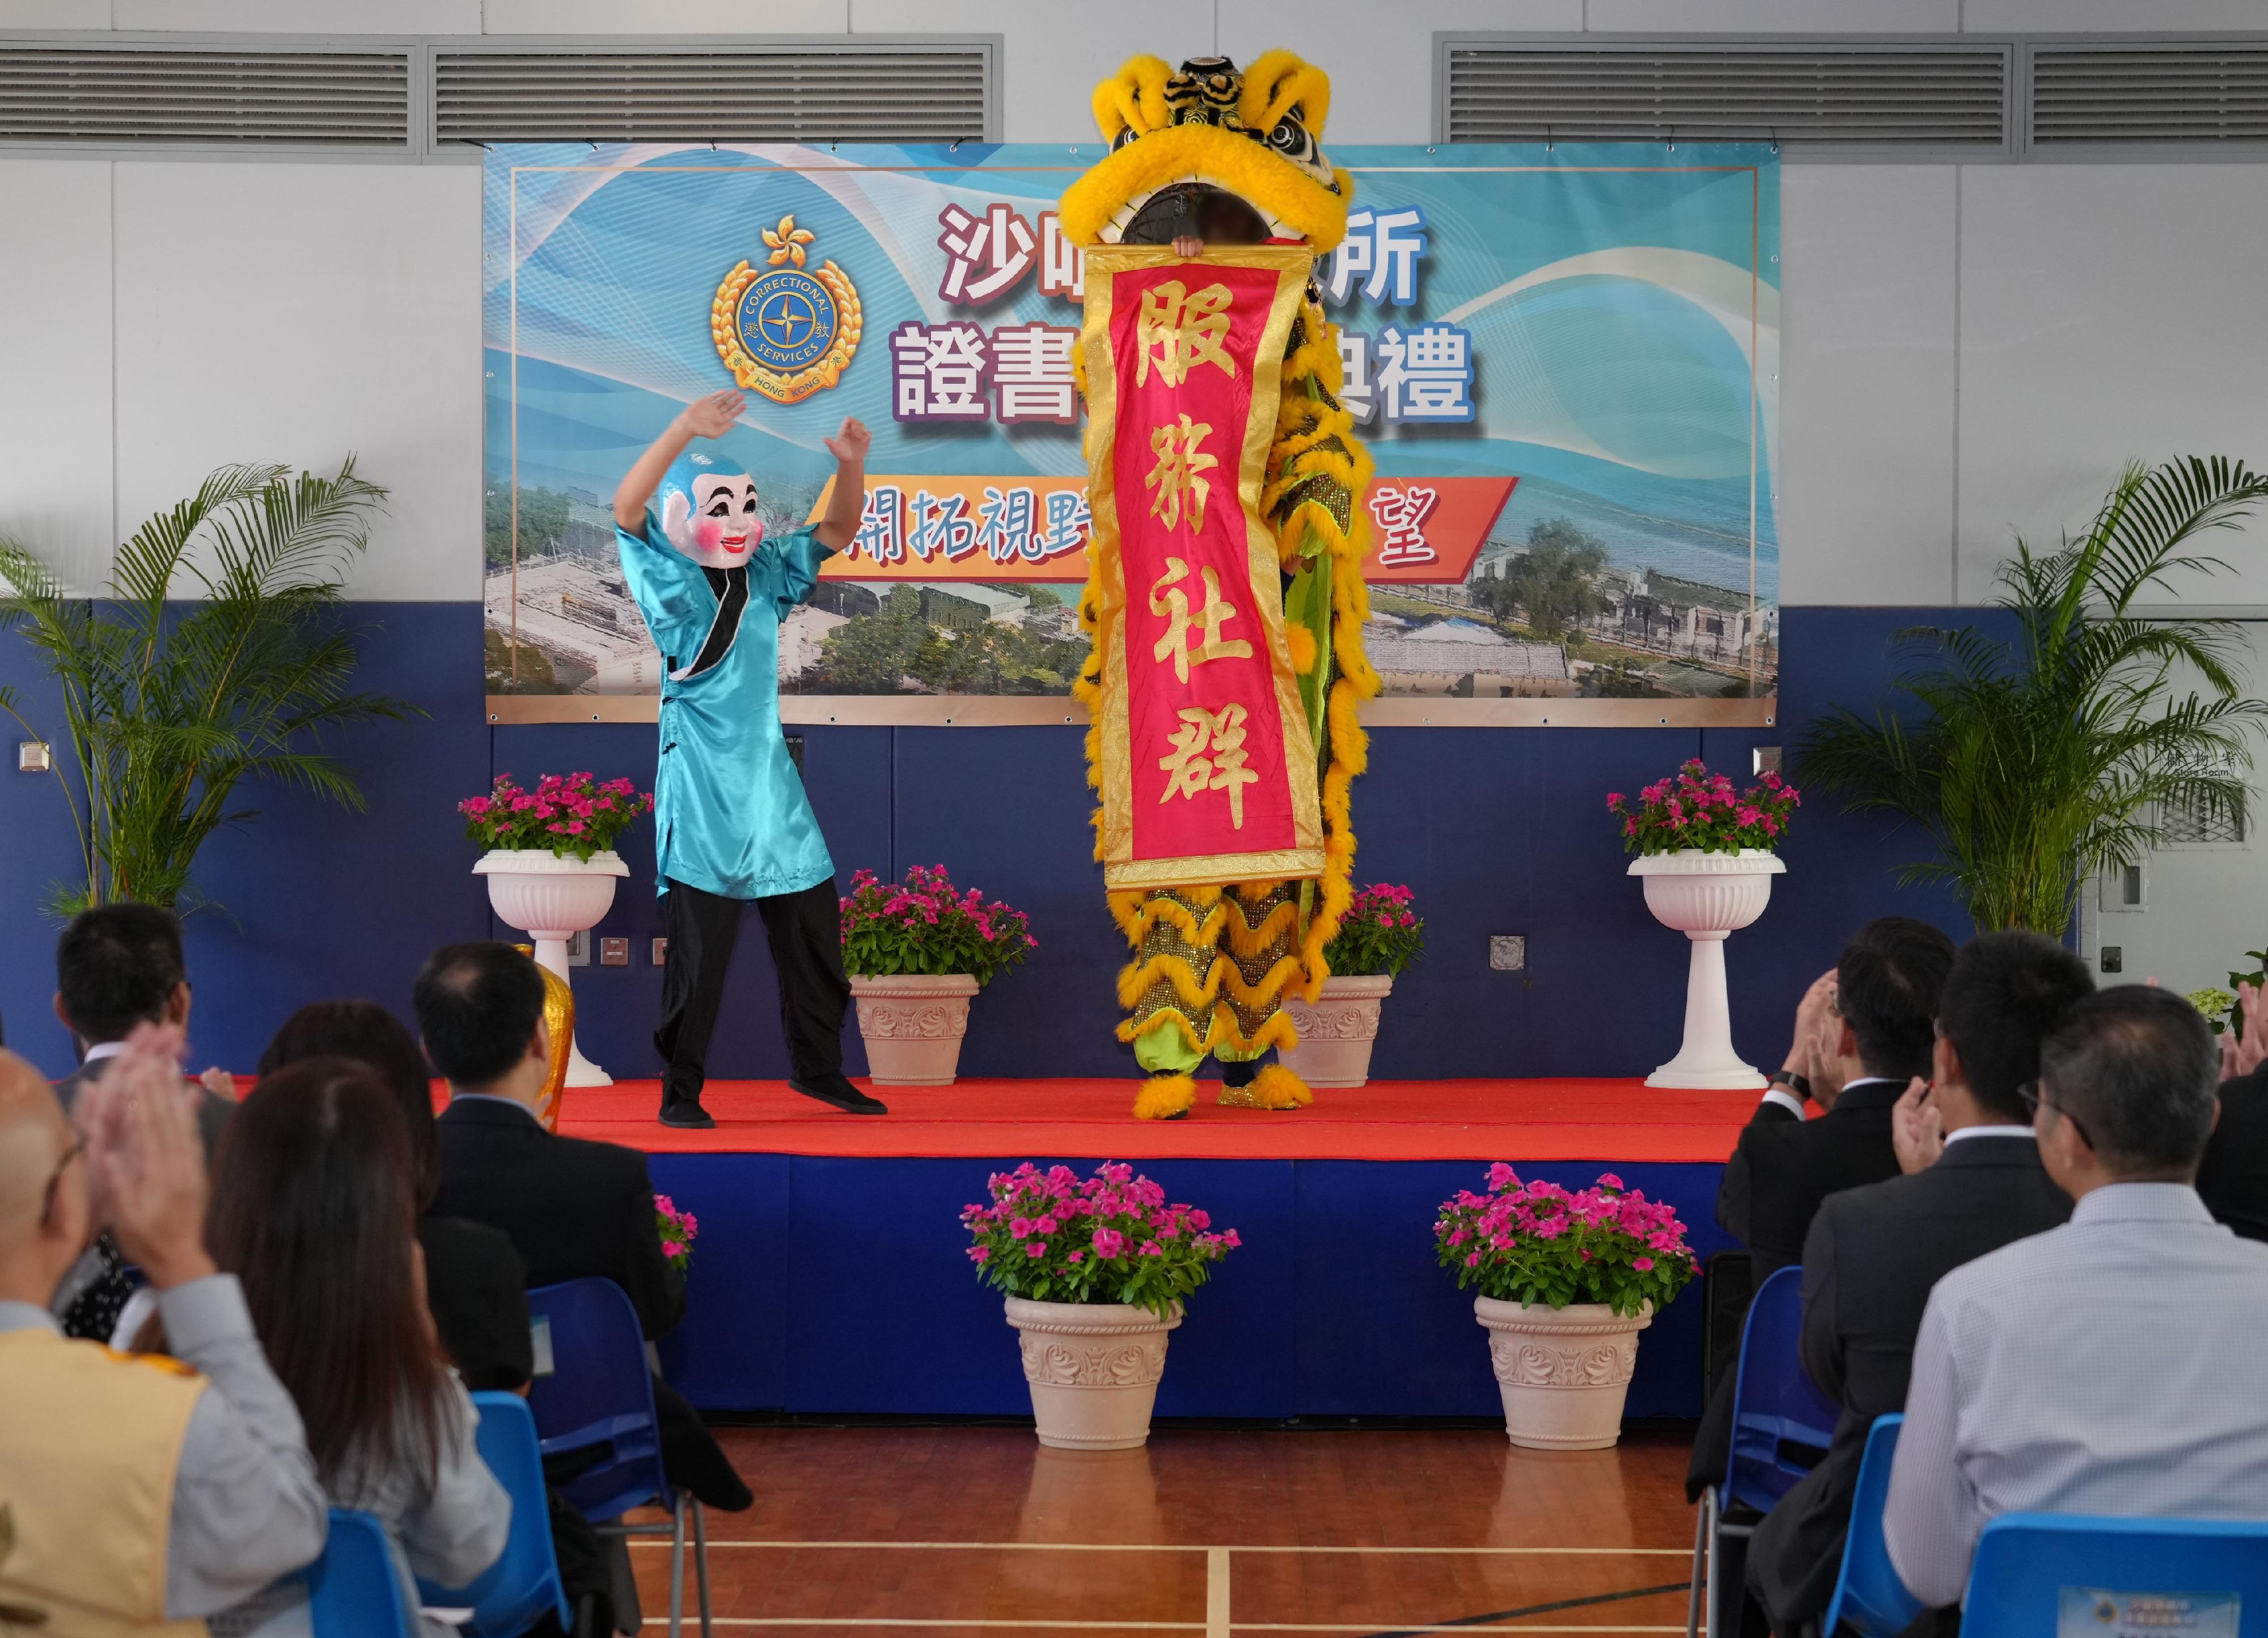 Young persons in custody (PICs) at Sha Tsui Correctional Institution of the Correctional Services Department were presented with certificates at a ceremony today (October 13) in recognition of their efforts and achievements in studies and vocational examinations. Photo shows PICs from the lion dance team performing a lion dance at the ceremony.